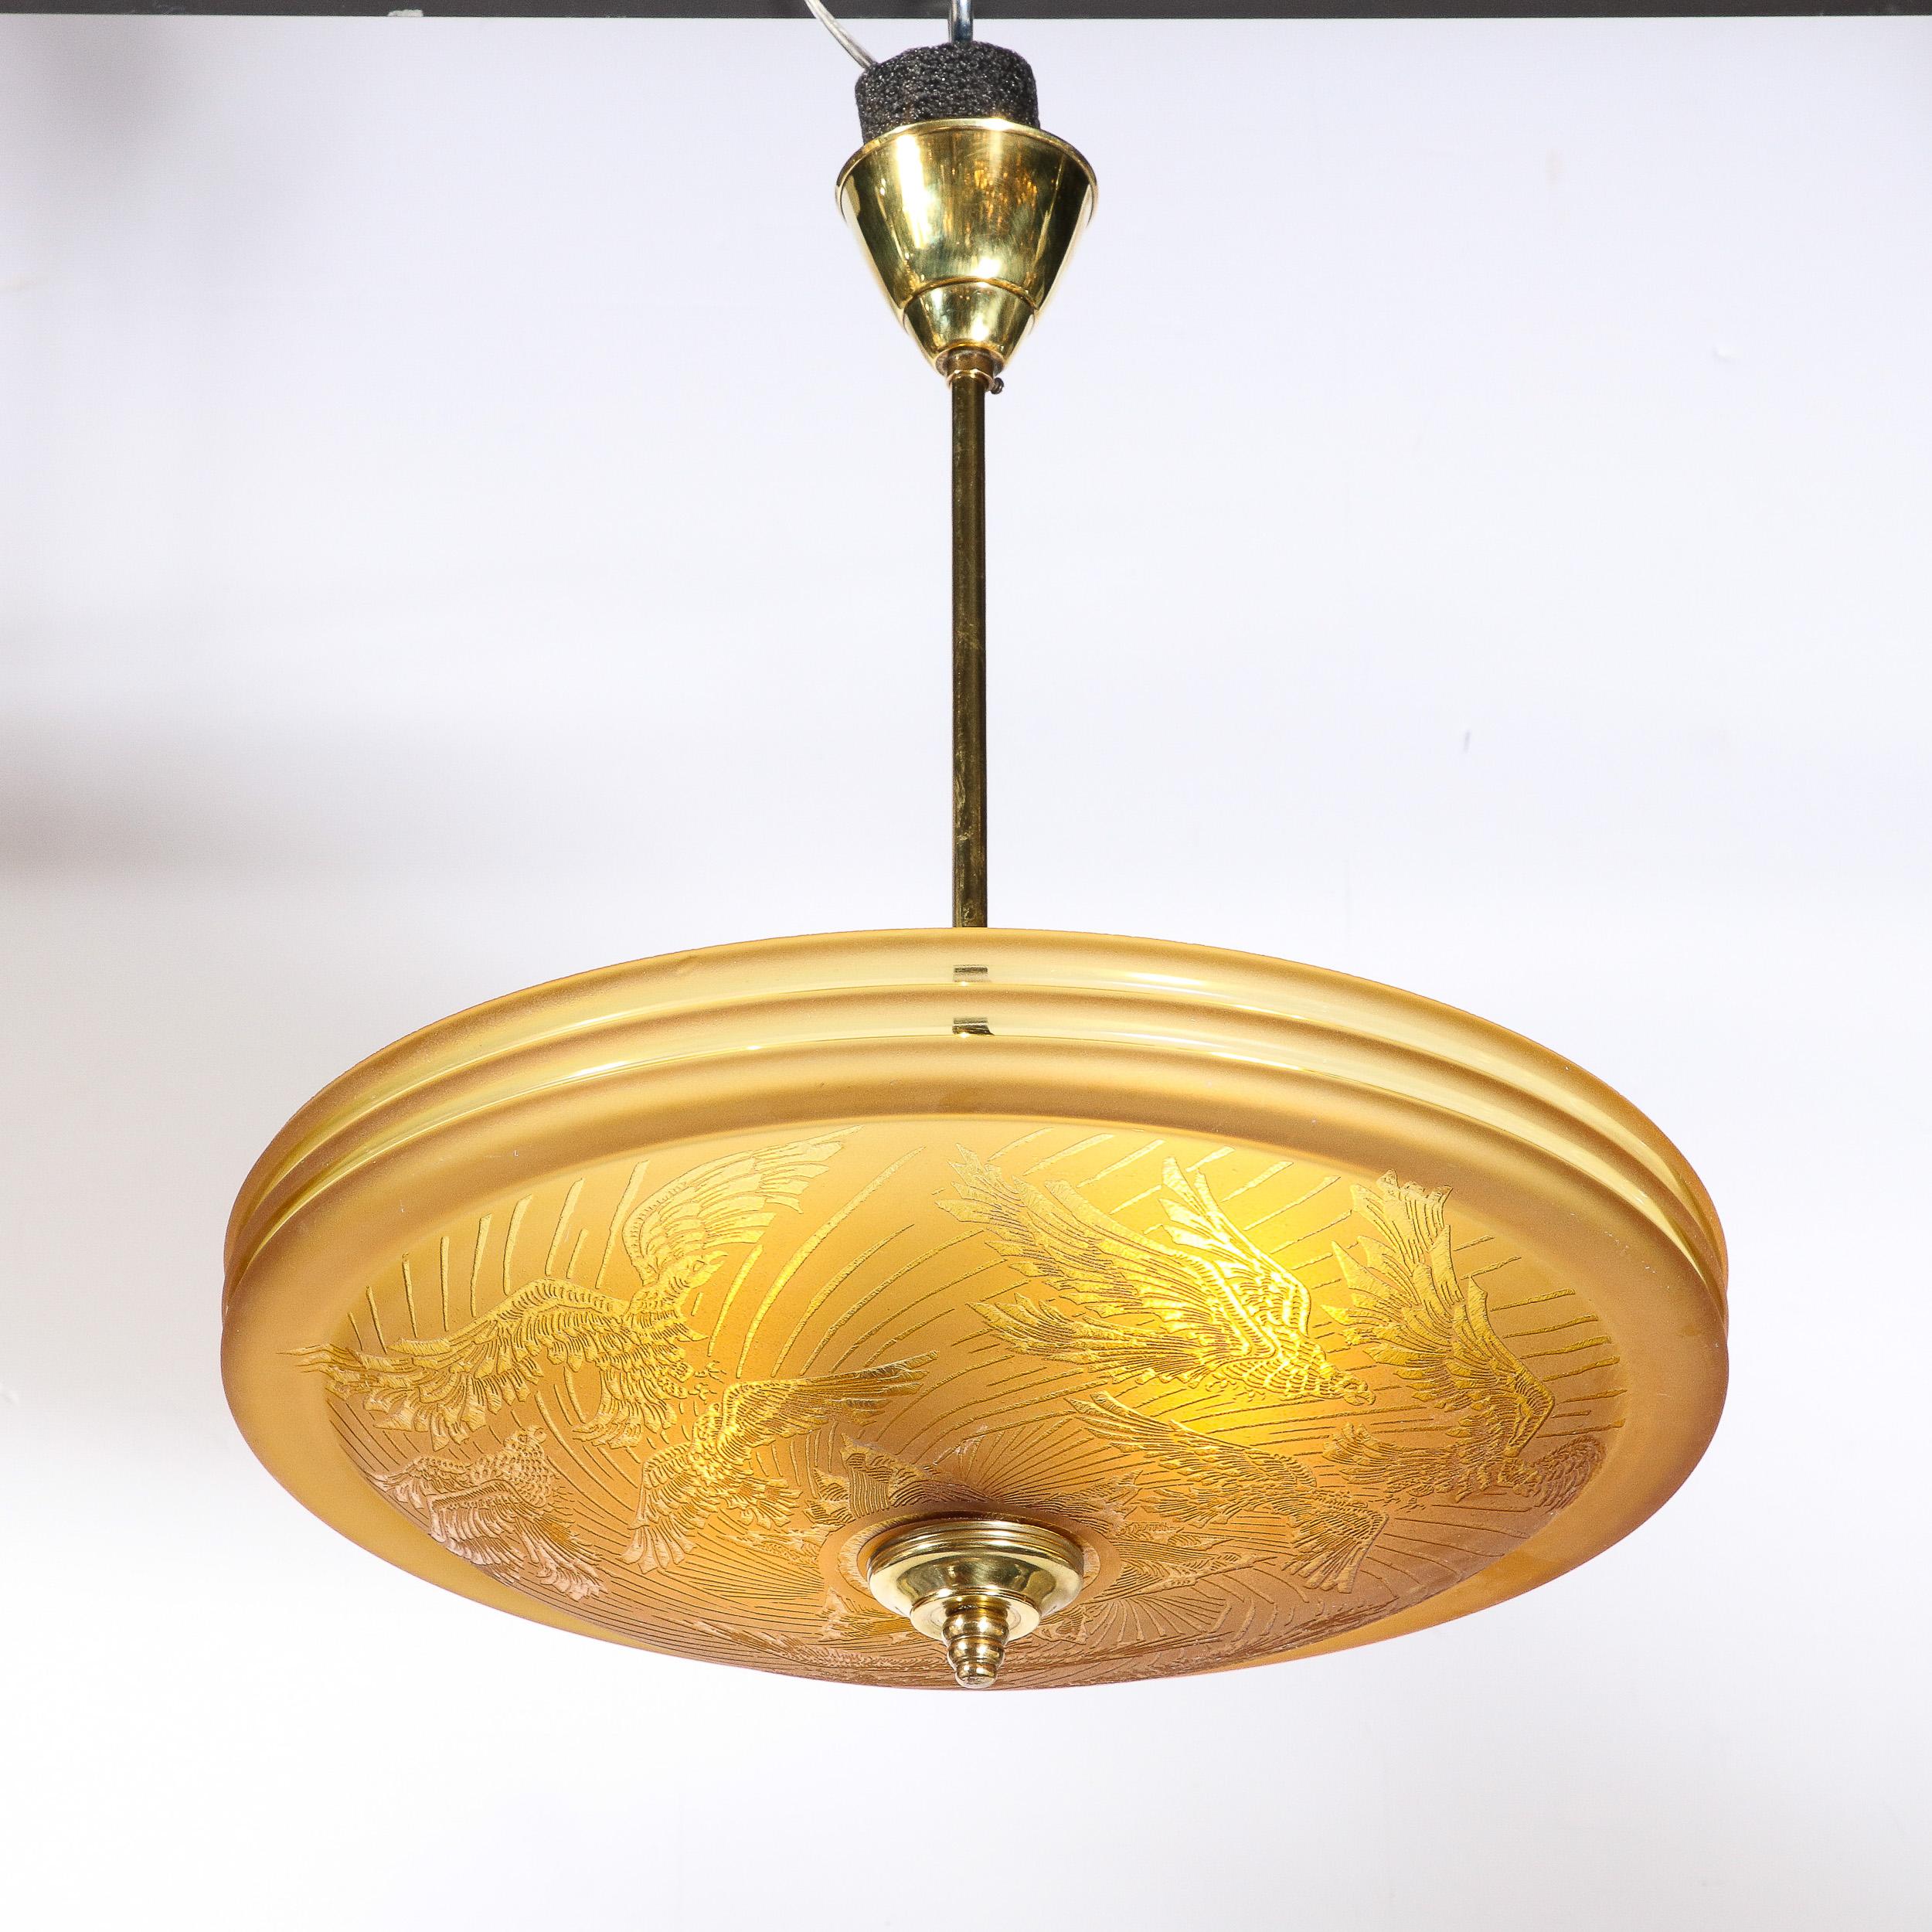 Art Deco Pendant Chandelier in Amber with Acid Etched  Motif by Deveau 2